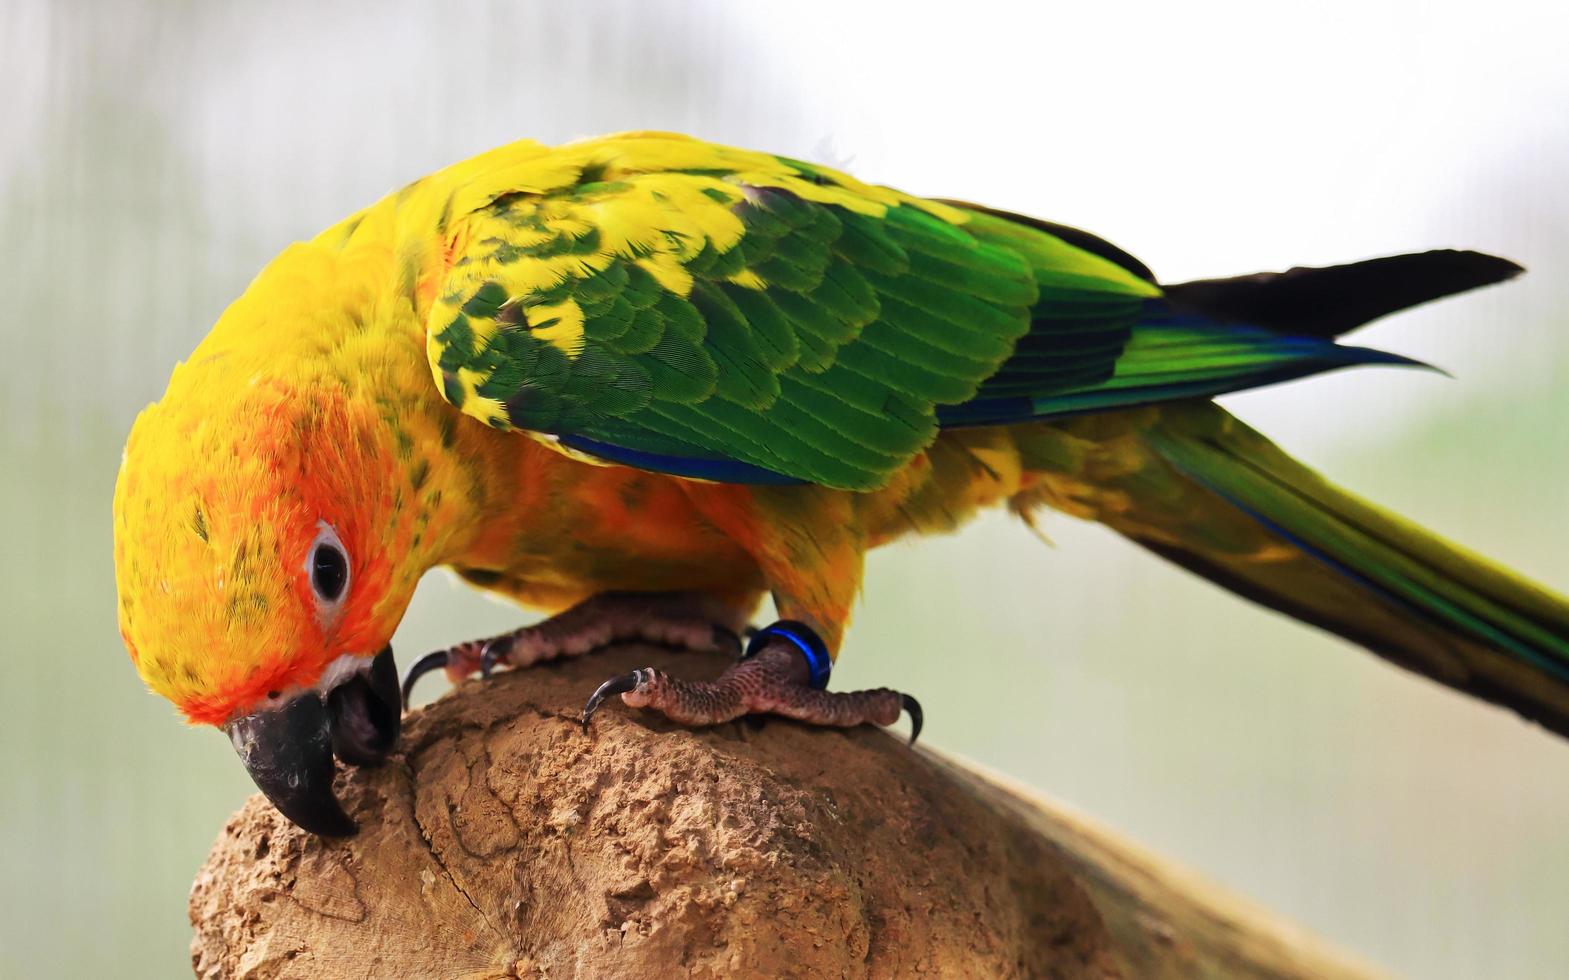 Parrot perched on a branch photo